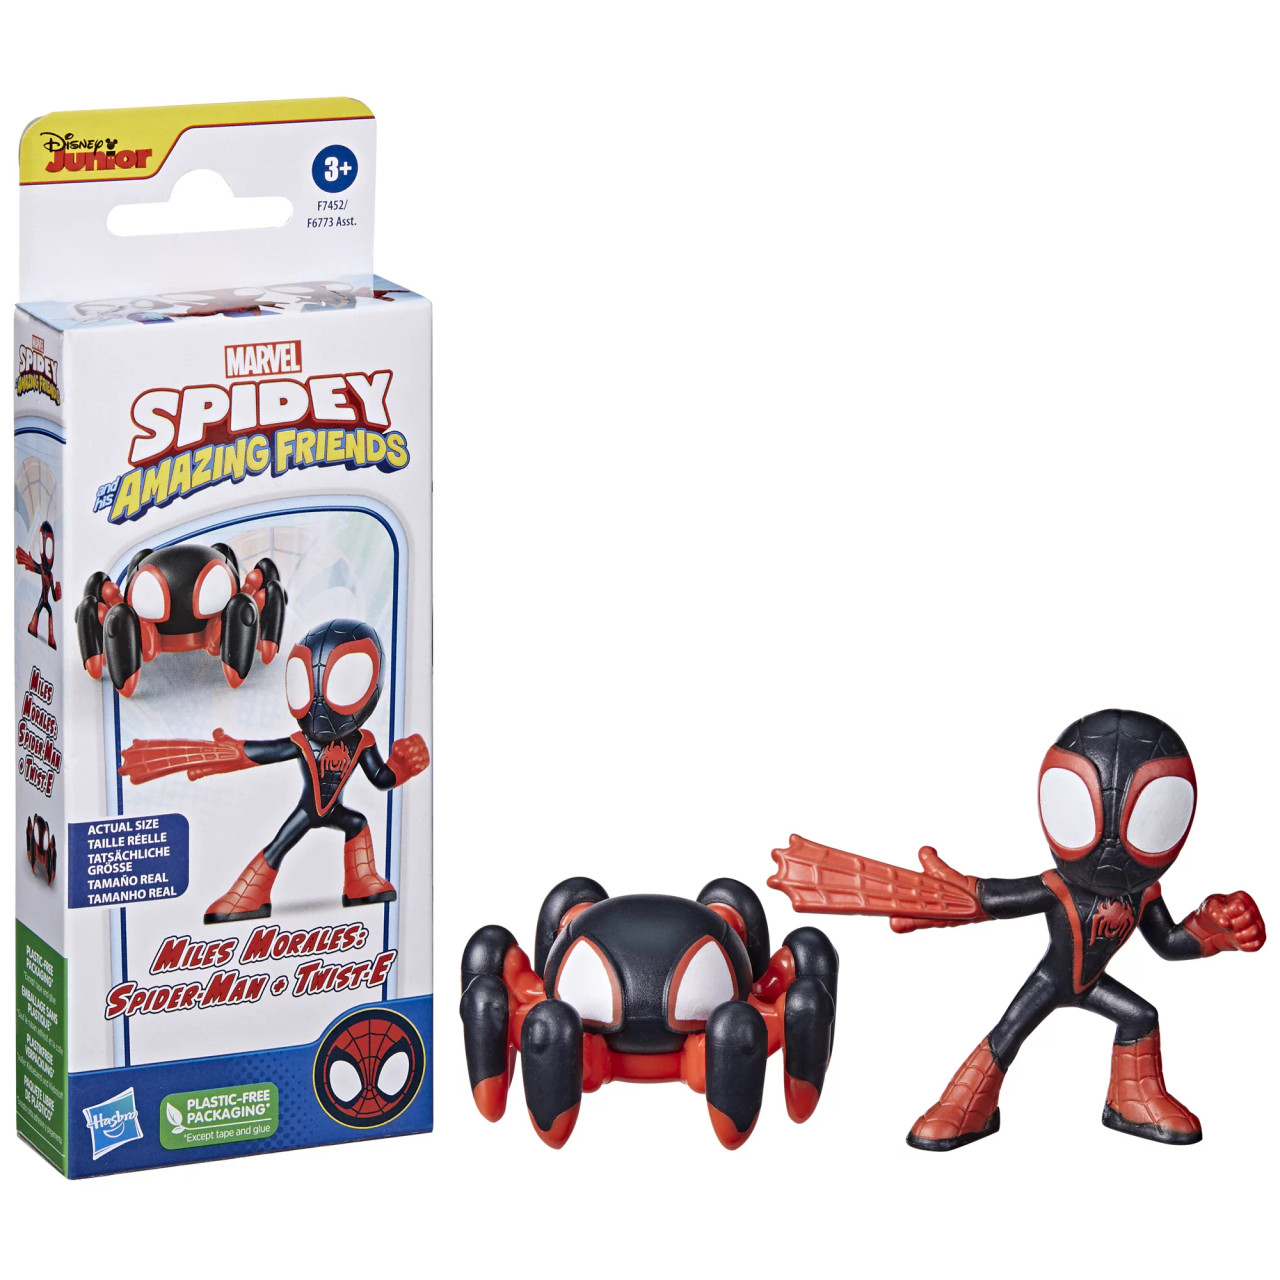 Hasbro Marvel Spidey and his amazing friends - Miles Morales